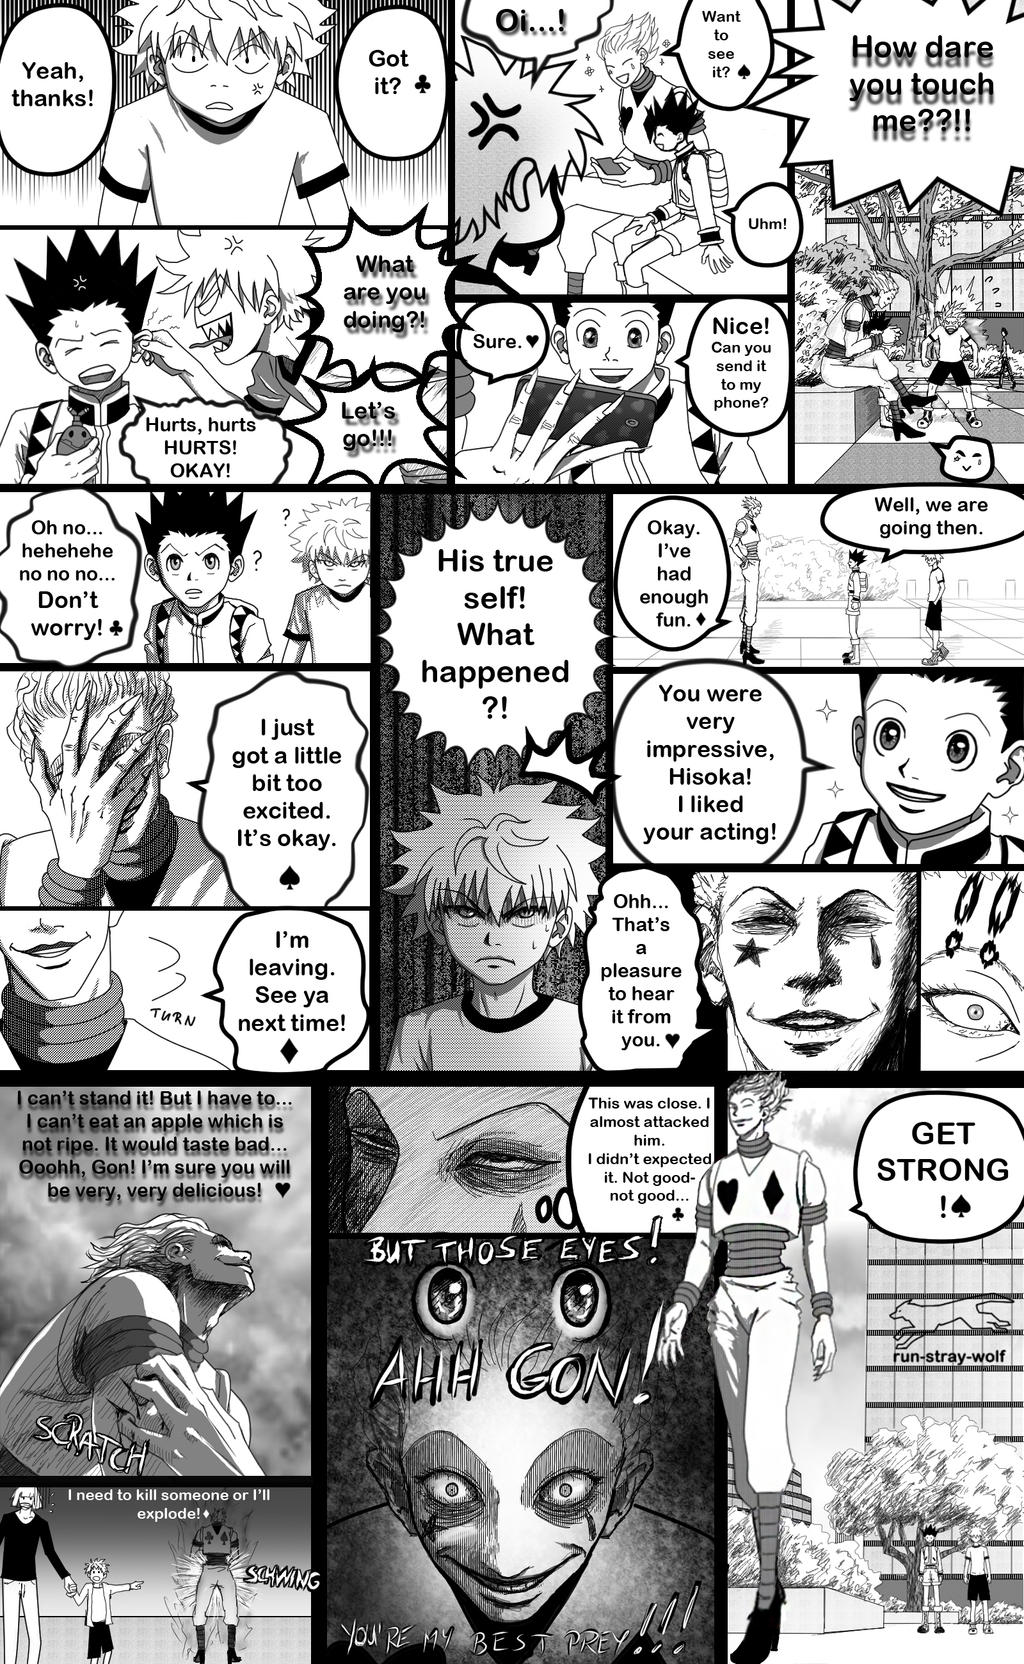 A miracle smile - PAGE 1 by RunStrayWolf on DeviantArt